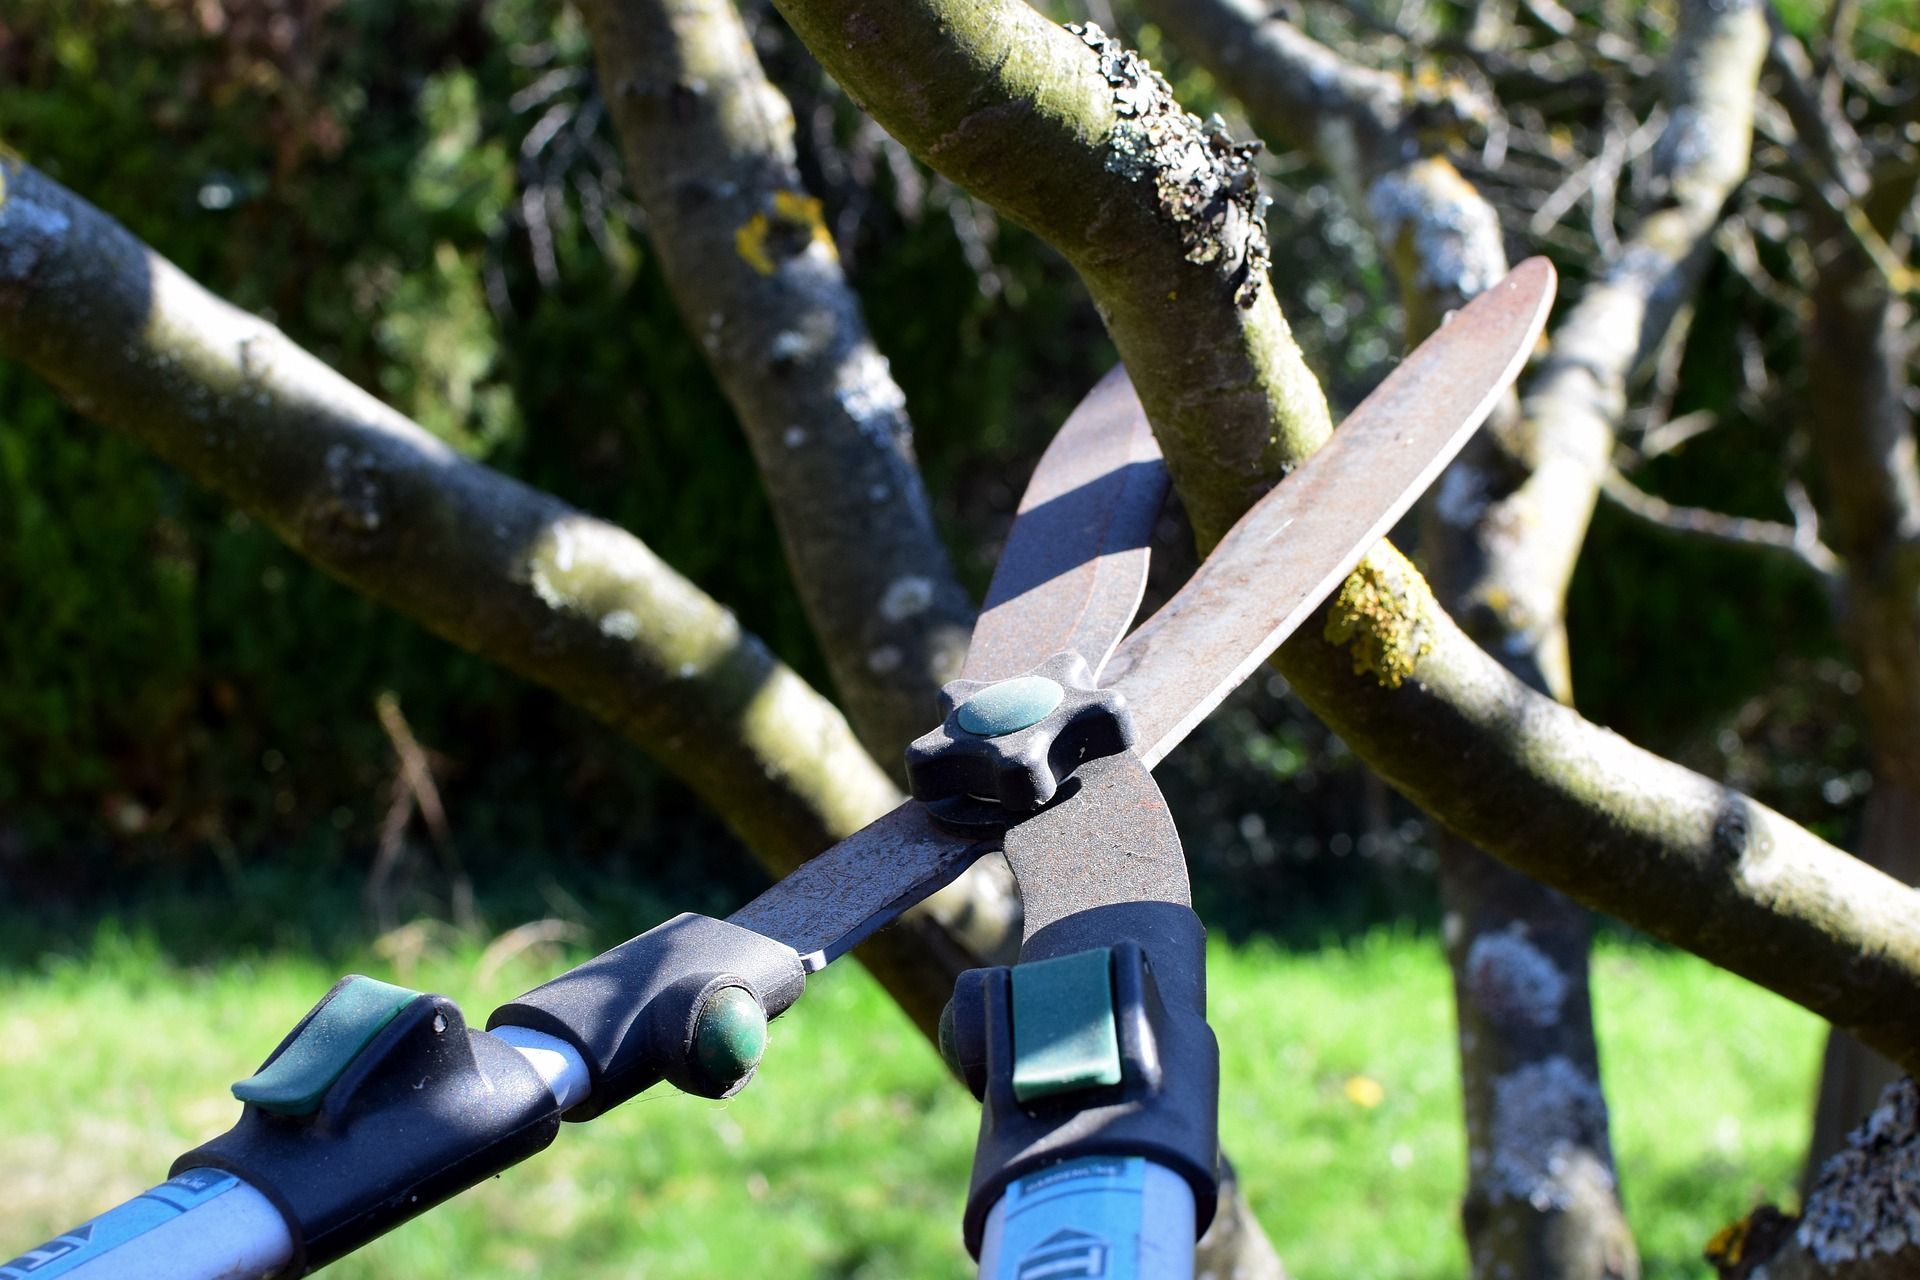 Pruning Shears for Pruning Trees | Texas Tree Care